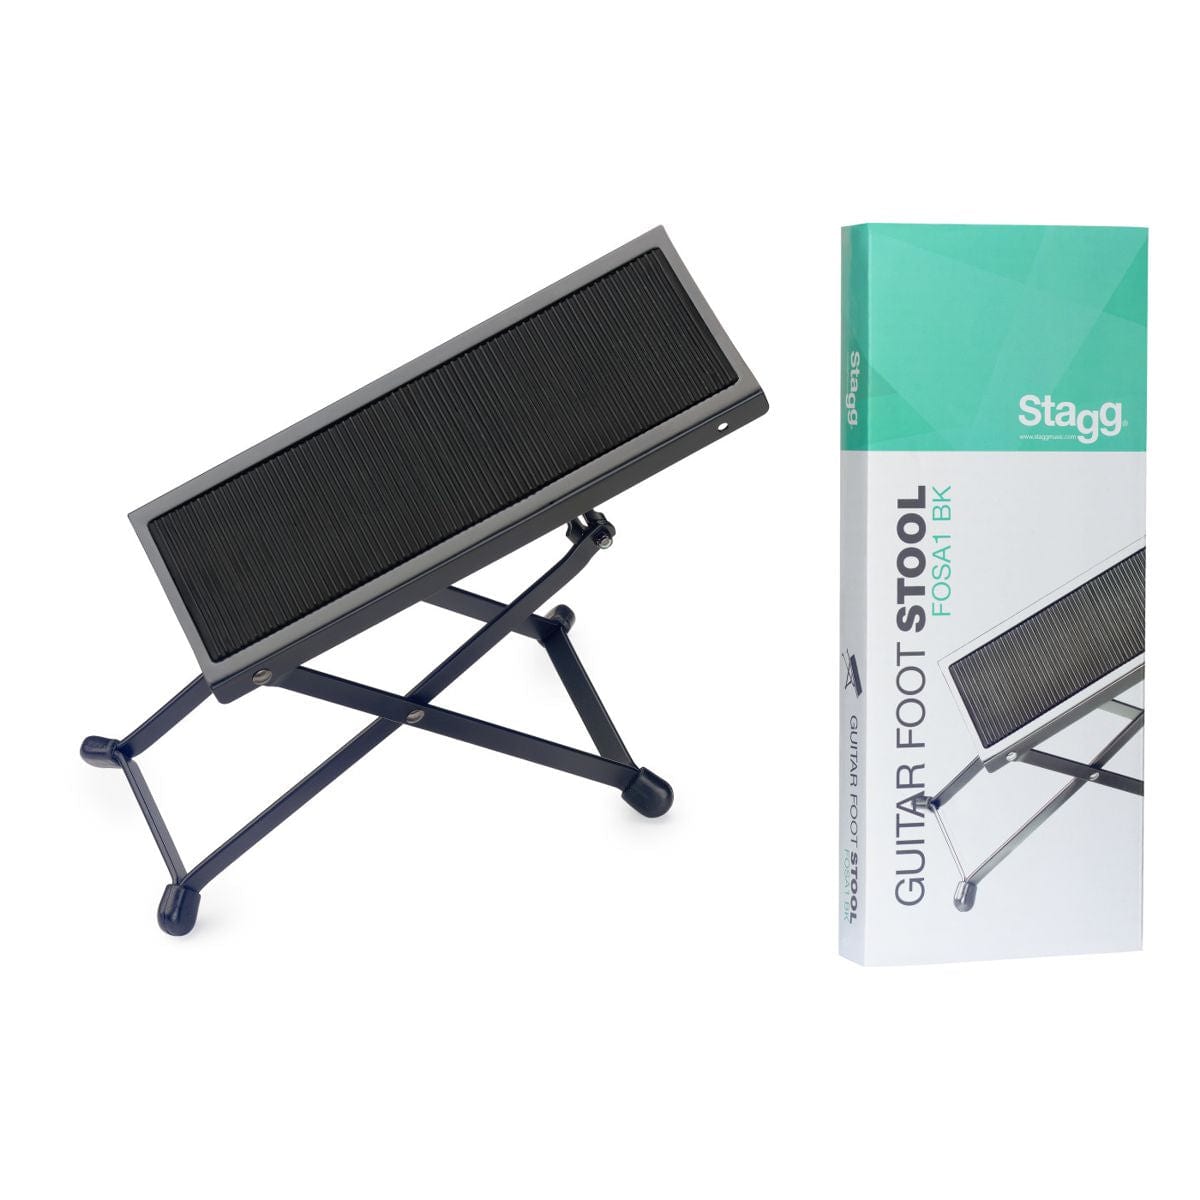 Stagg - FOSQ1 - Metal Foot Rest for Guitar Players - 882030220548